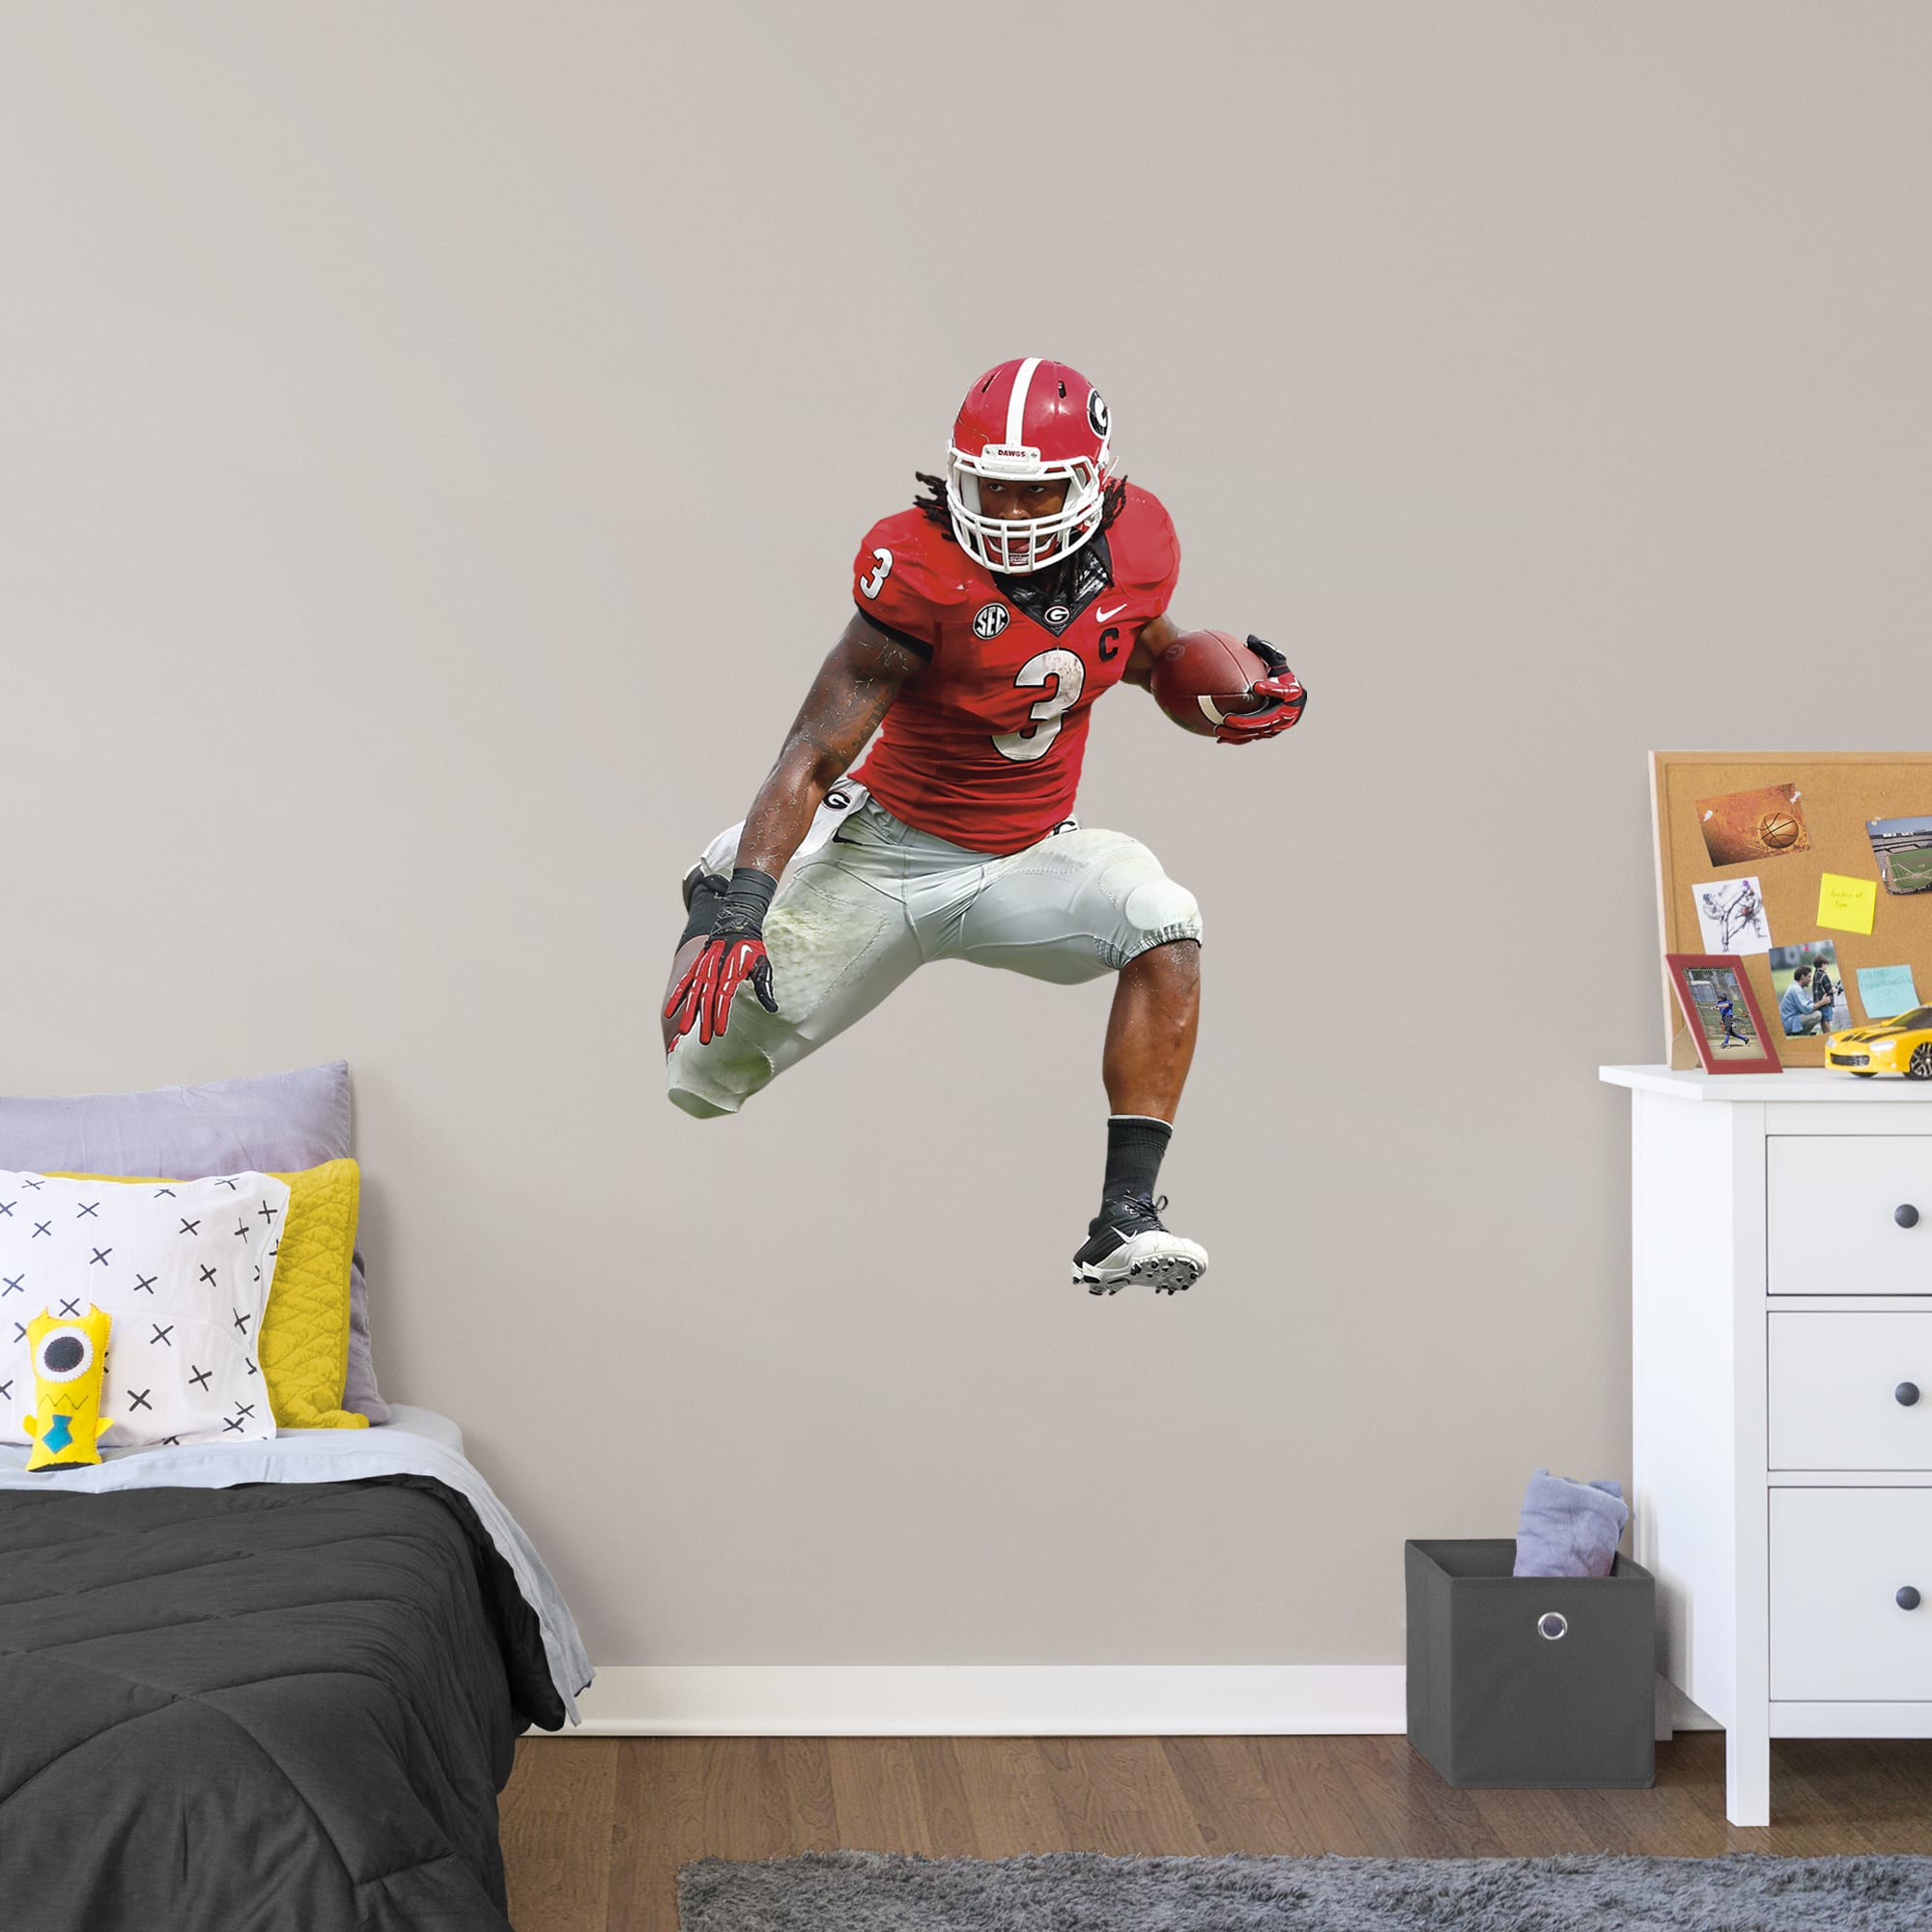 Todd Gurley for Georgia Bulldogs: Georgia - Officially Licensed Removable Wall Decal Giant Athlete + 2 Decals (30"W x 51"H) by F